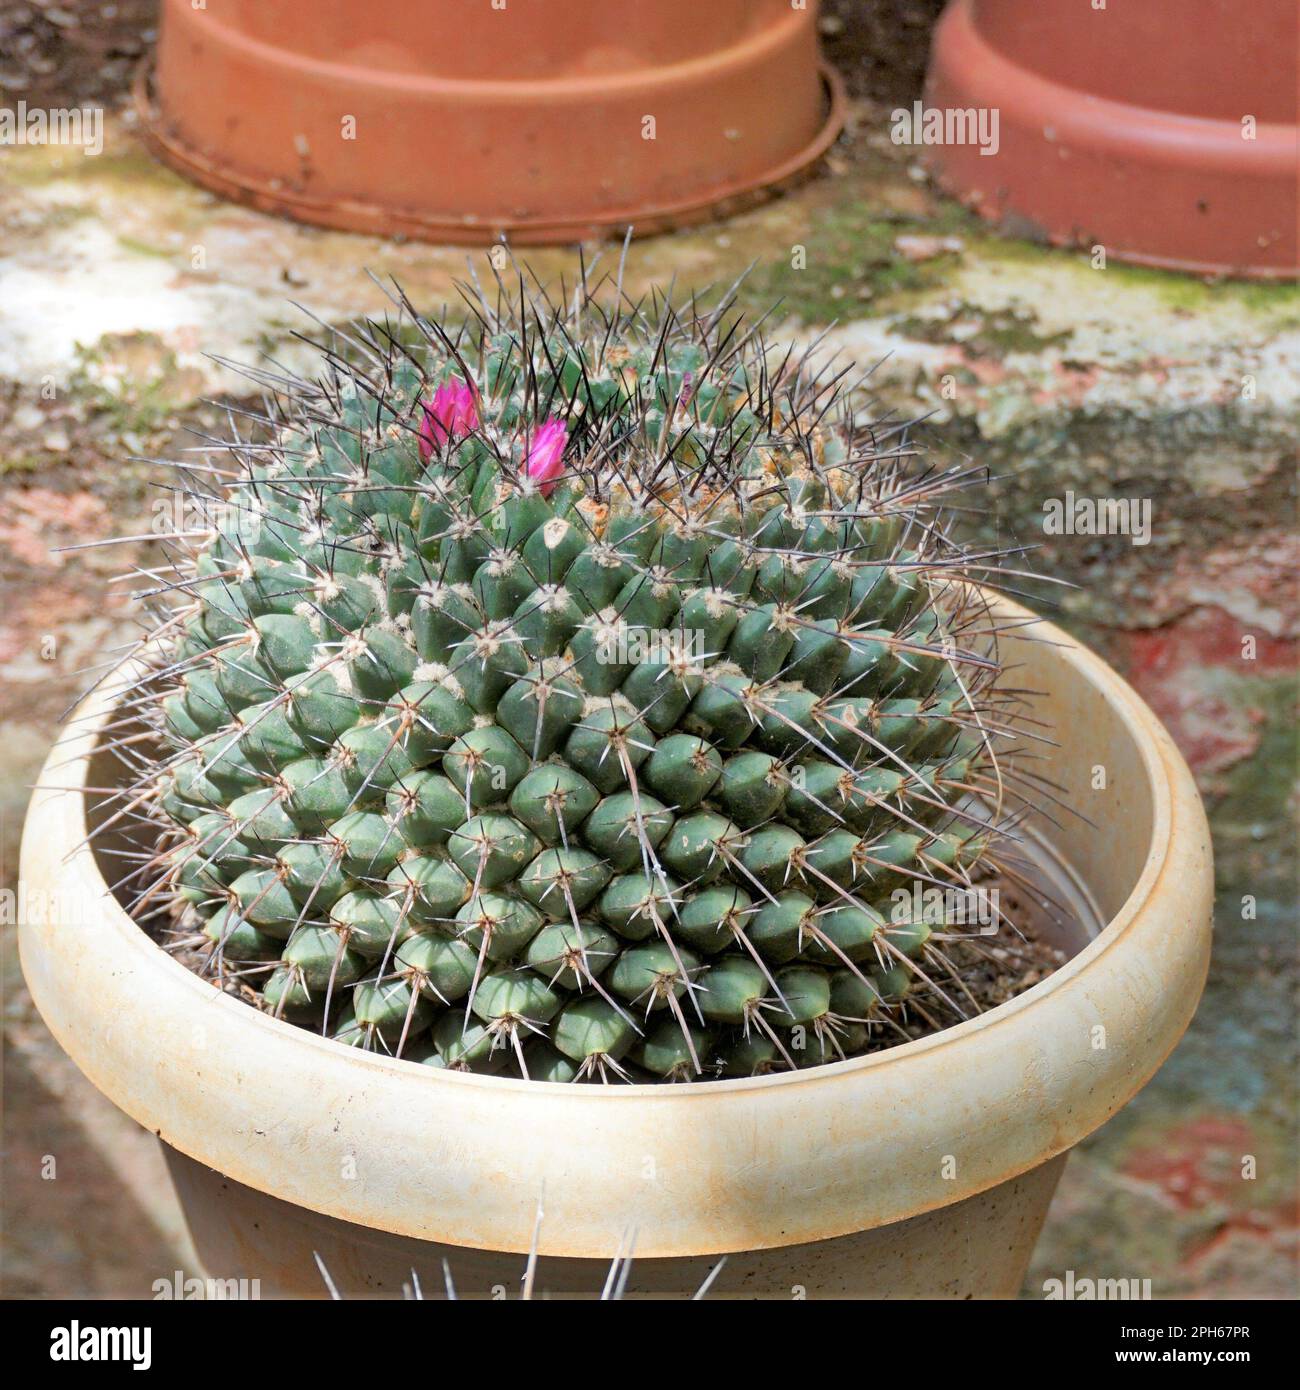 Mammillaria spinosissima known as the spiny pincushion cactus, Beehive cactus, Spinystar is a flowering cacti. Used for an ornamental purpose. Stock Photo